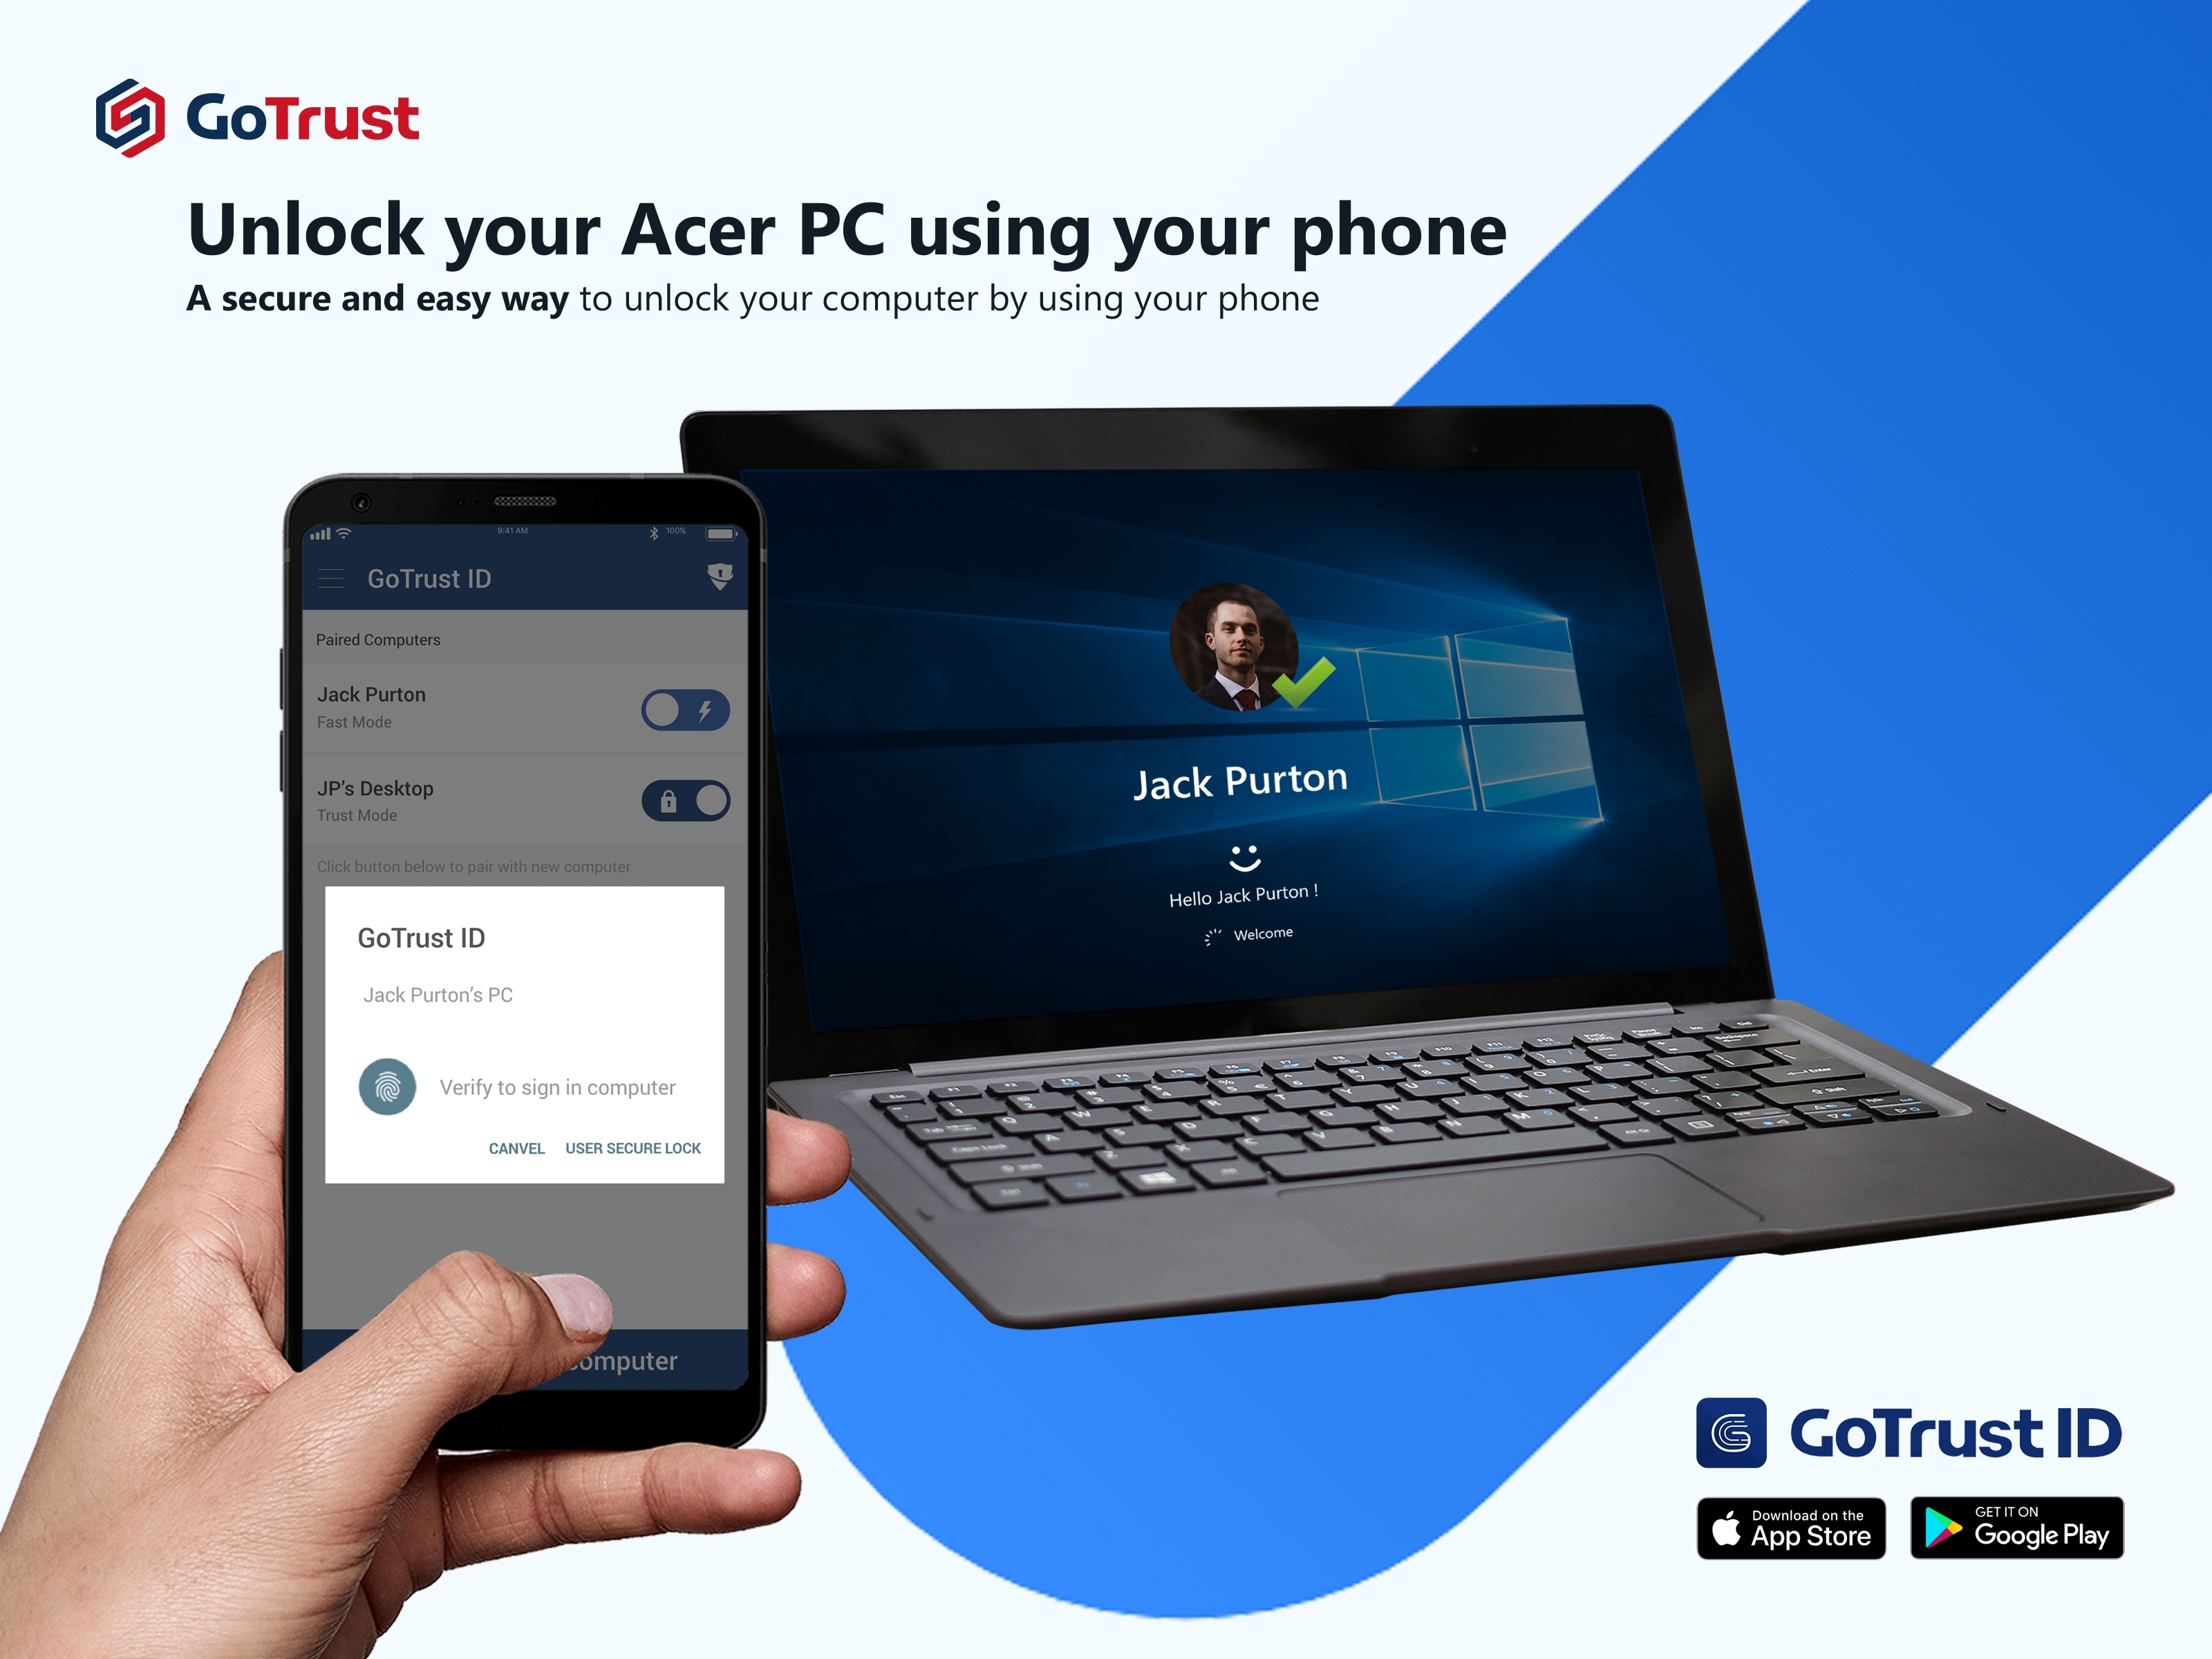 Gotrust Id To Be Preloaded On Acer Computers Gotrust Id Provides Passwordless Windows Hello Login And 2fa To Google And Facebook Services Using Phone Based Biometrics Business Wire